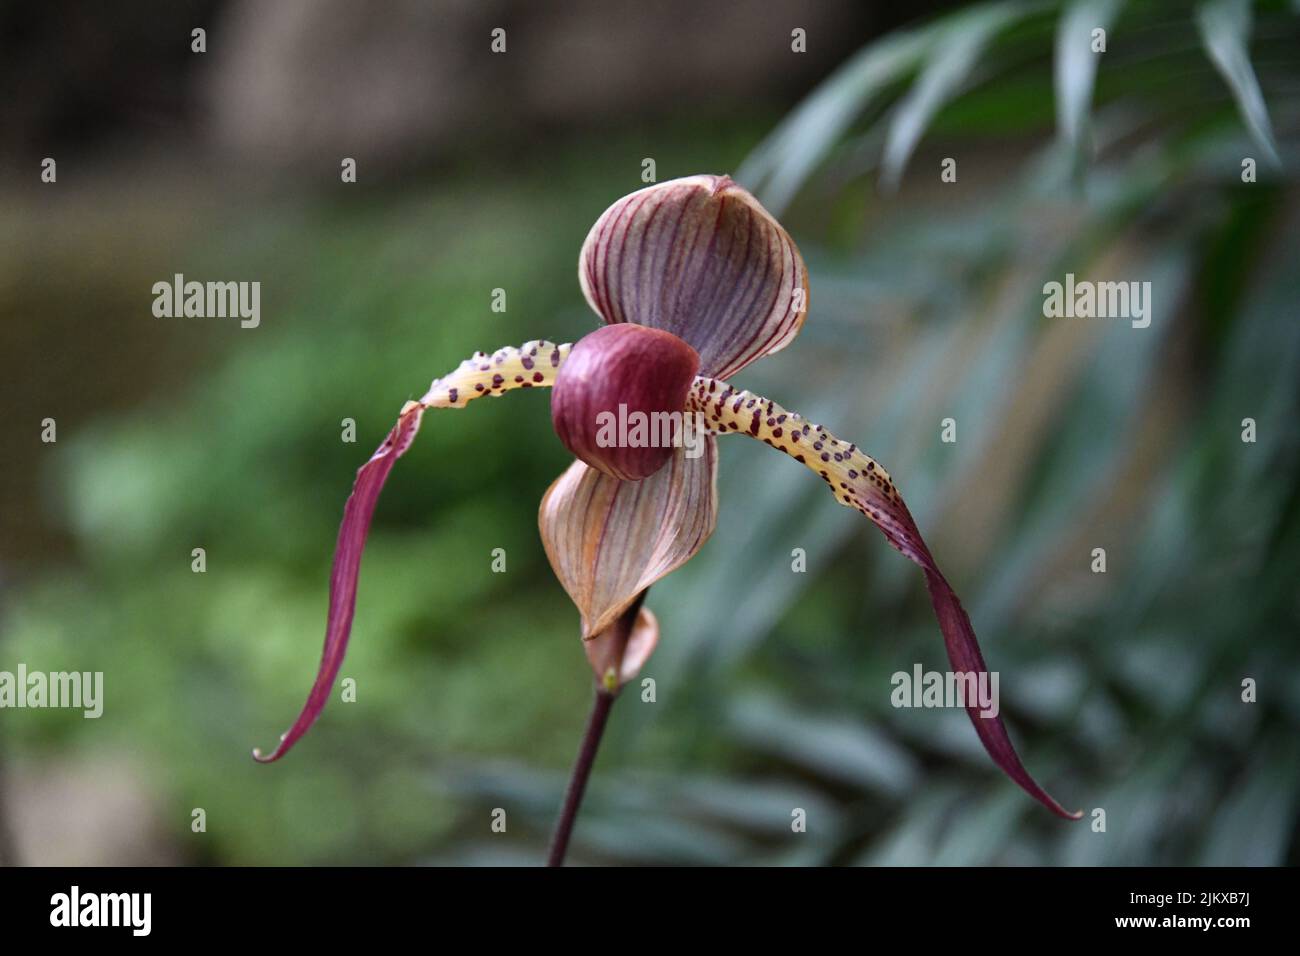 A closeup shot of a Venus Slipper flower in a garden surrounded by green leaves Stock Photo